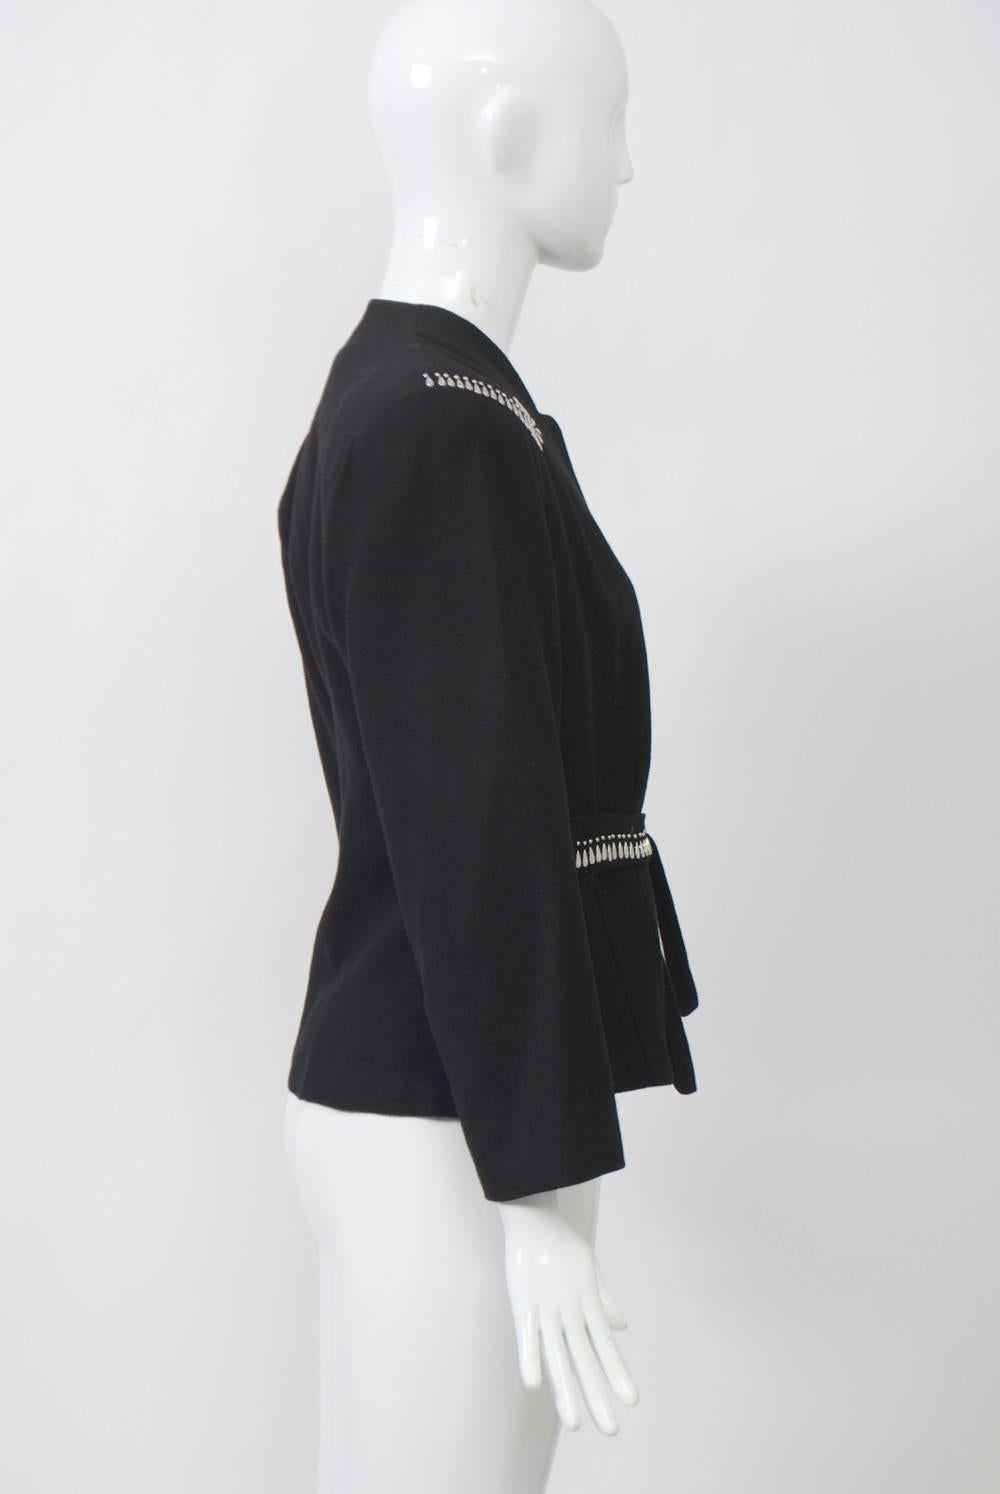 Black wool 1940s jacket with teardrop-shaped silver stud embellishment near shoulders and along front of self-tie waistband. Indented round neckline, square shoulders with pads, shaped body. Lined in black crepe.